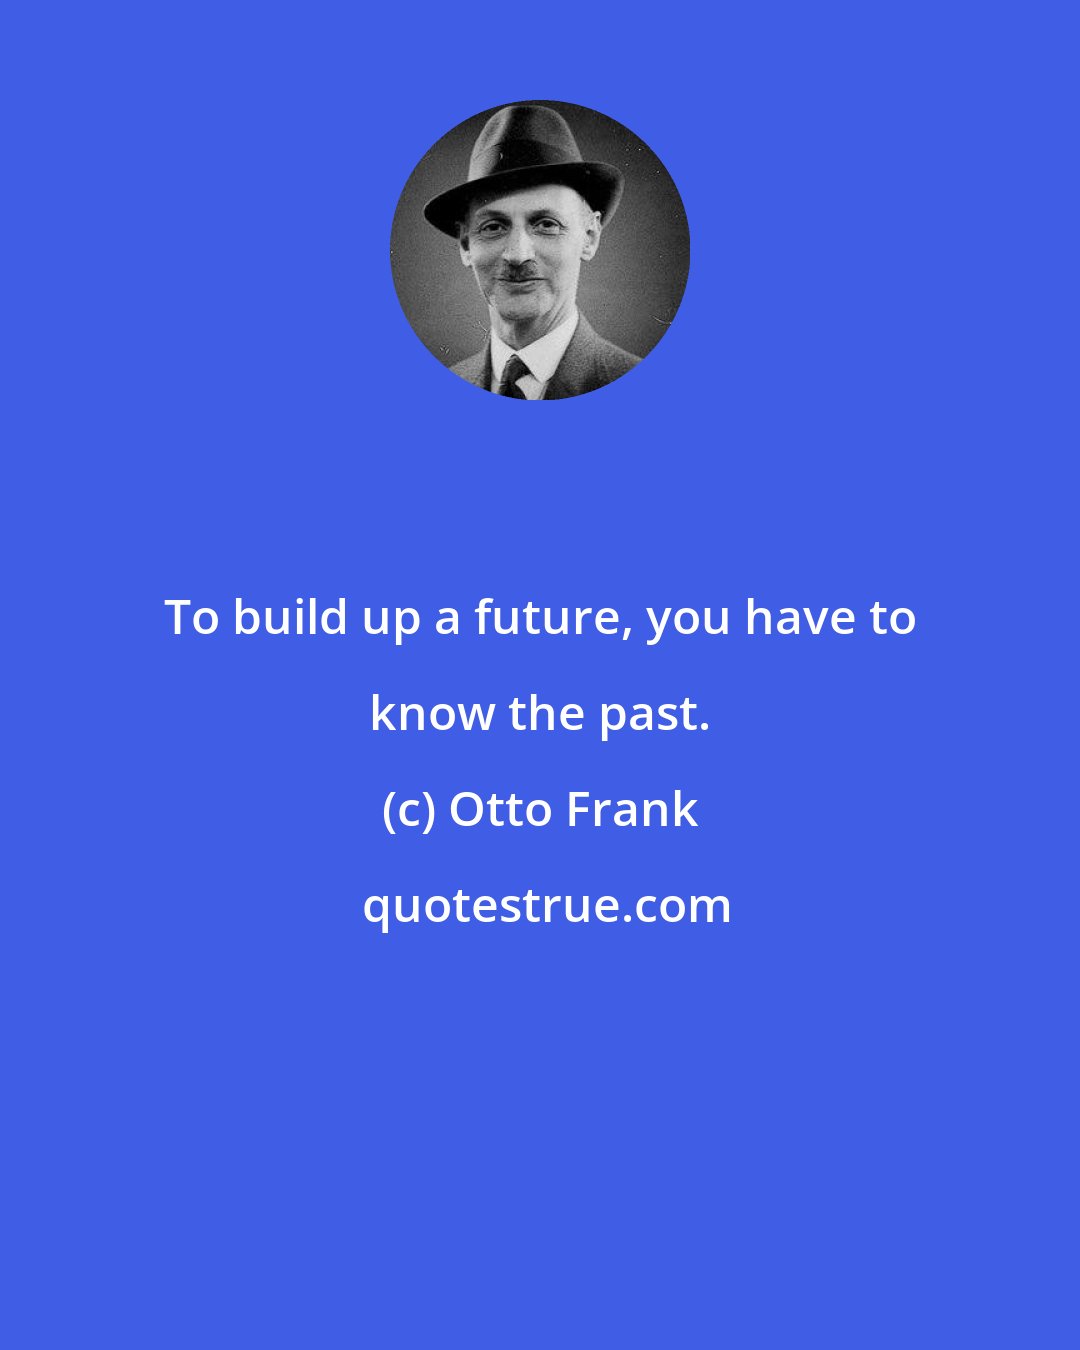 Otto Frank: To build up a future, you have to know the past.